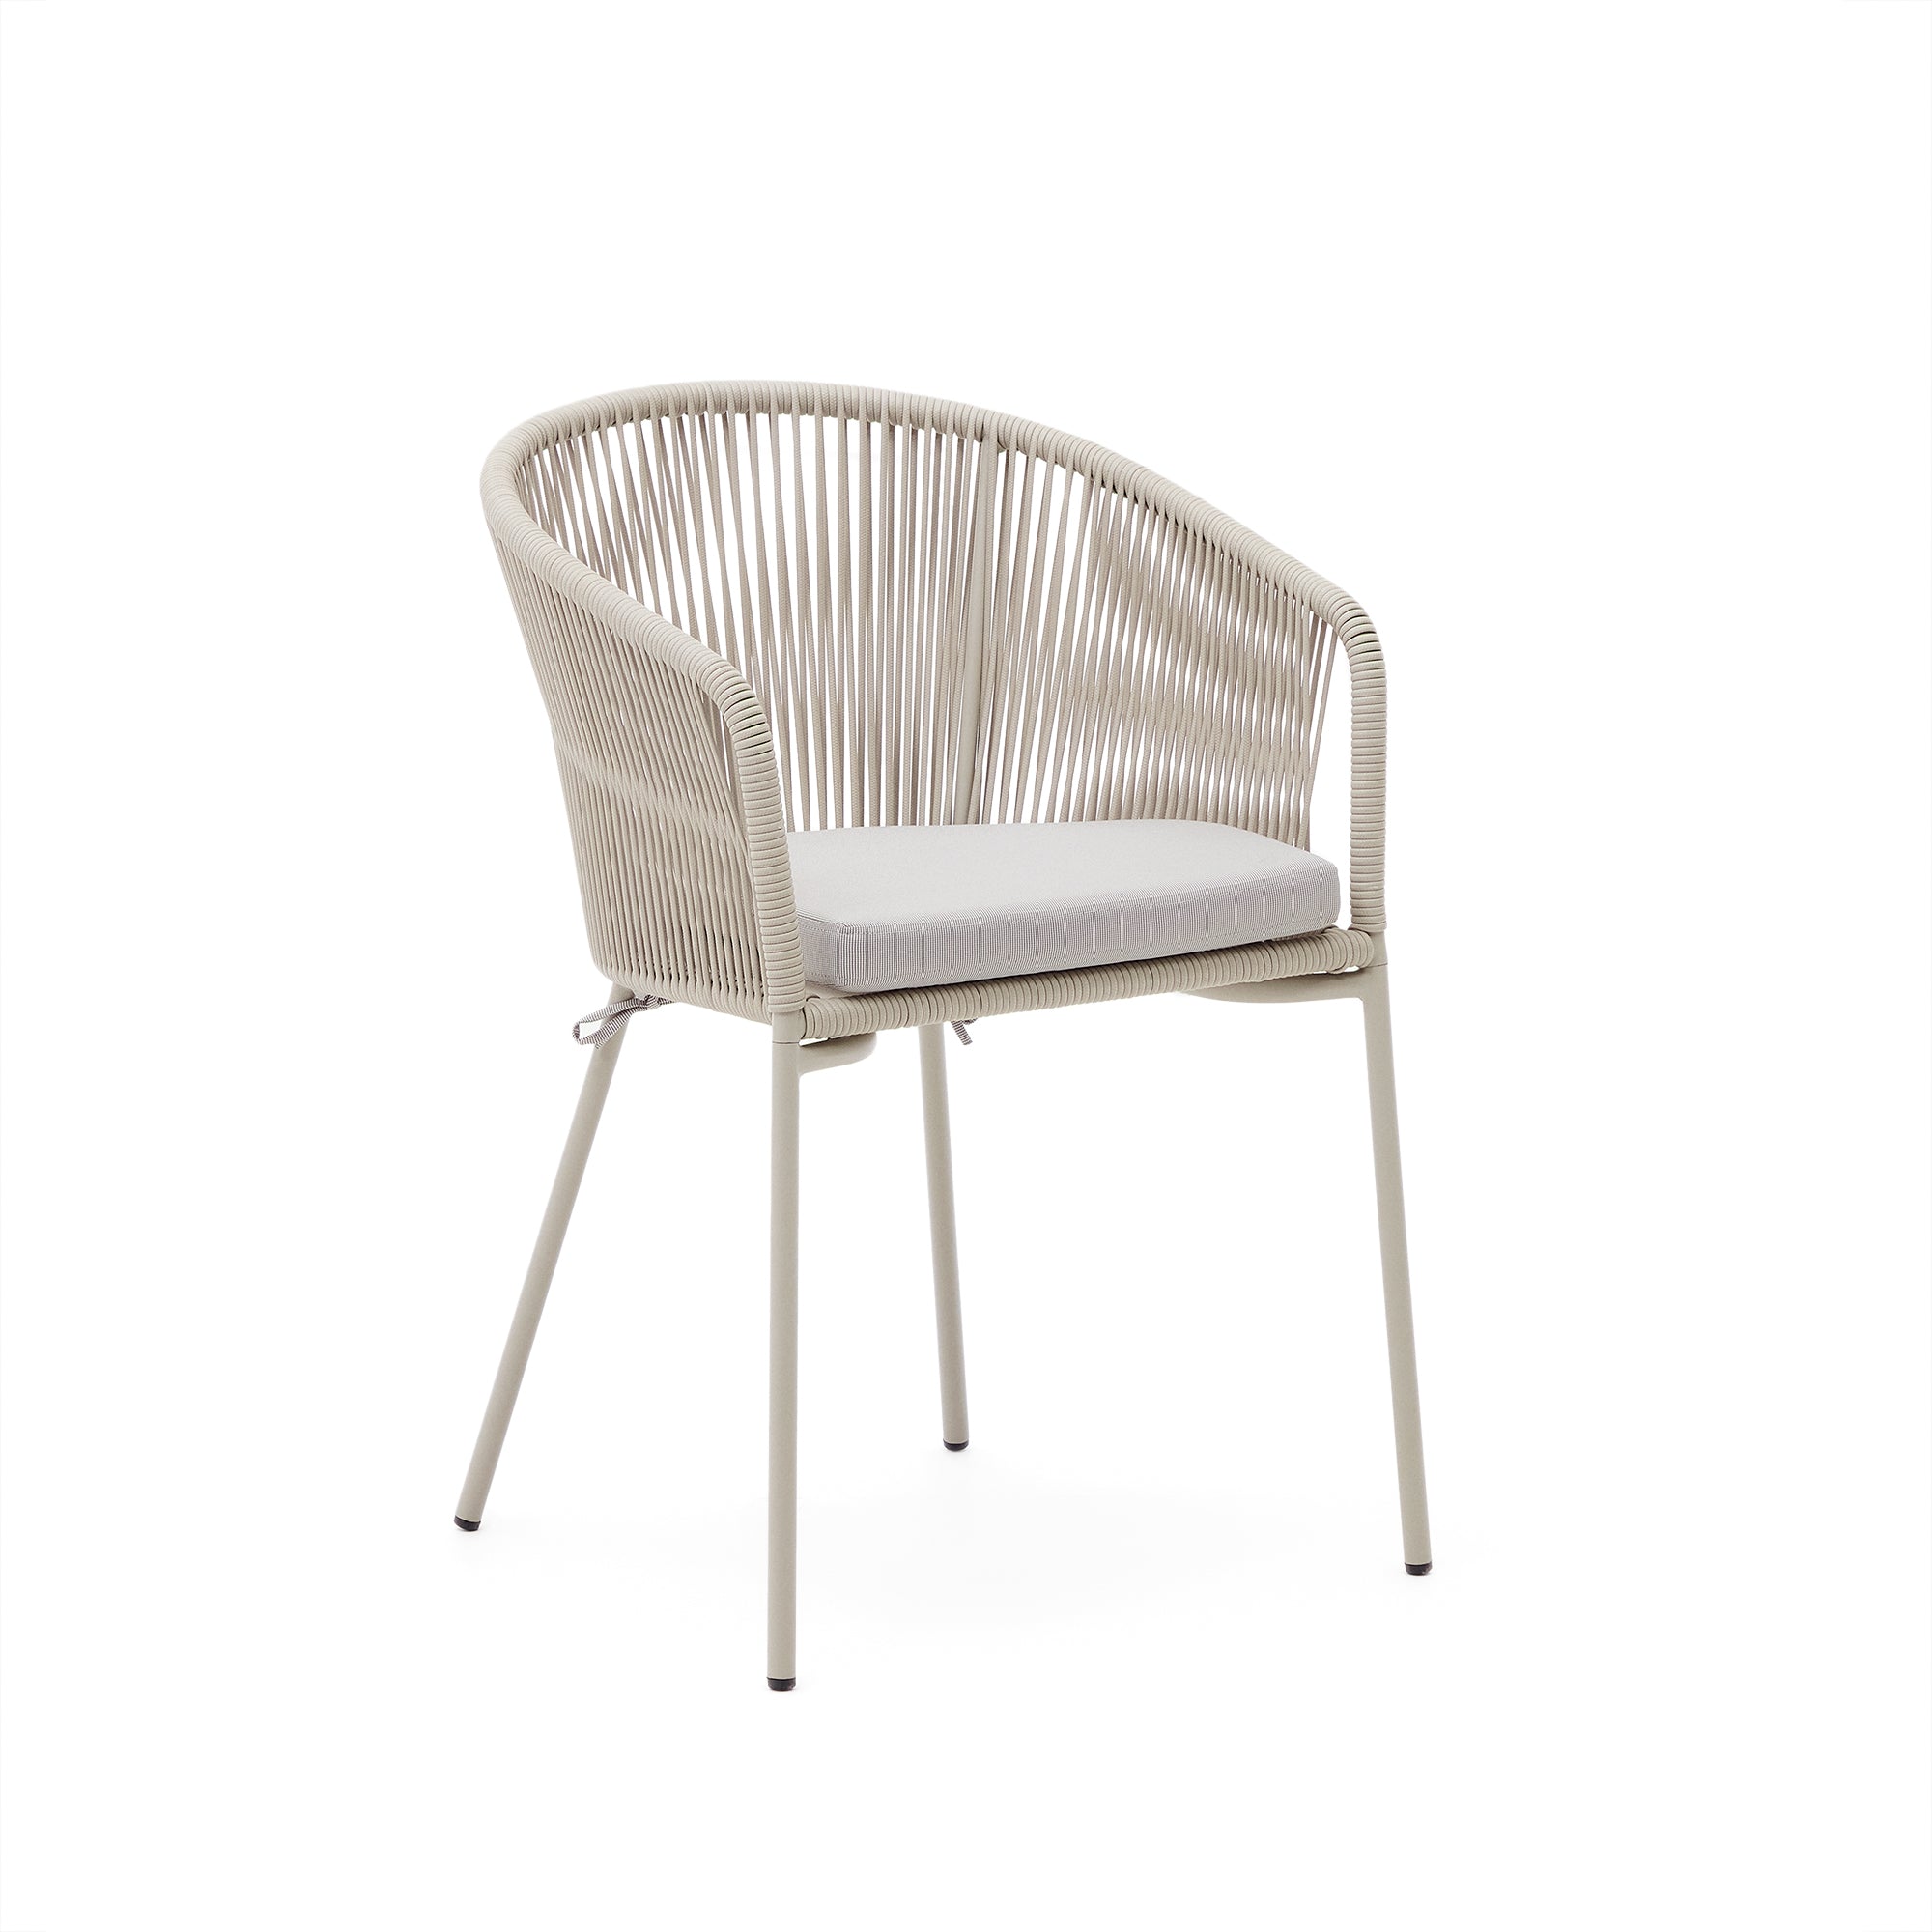 Yanet chair with synthetic rope in ecru color and galvanized steel legs